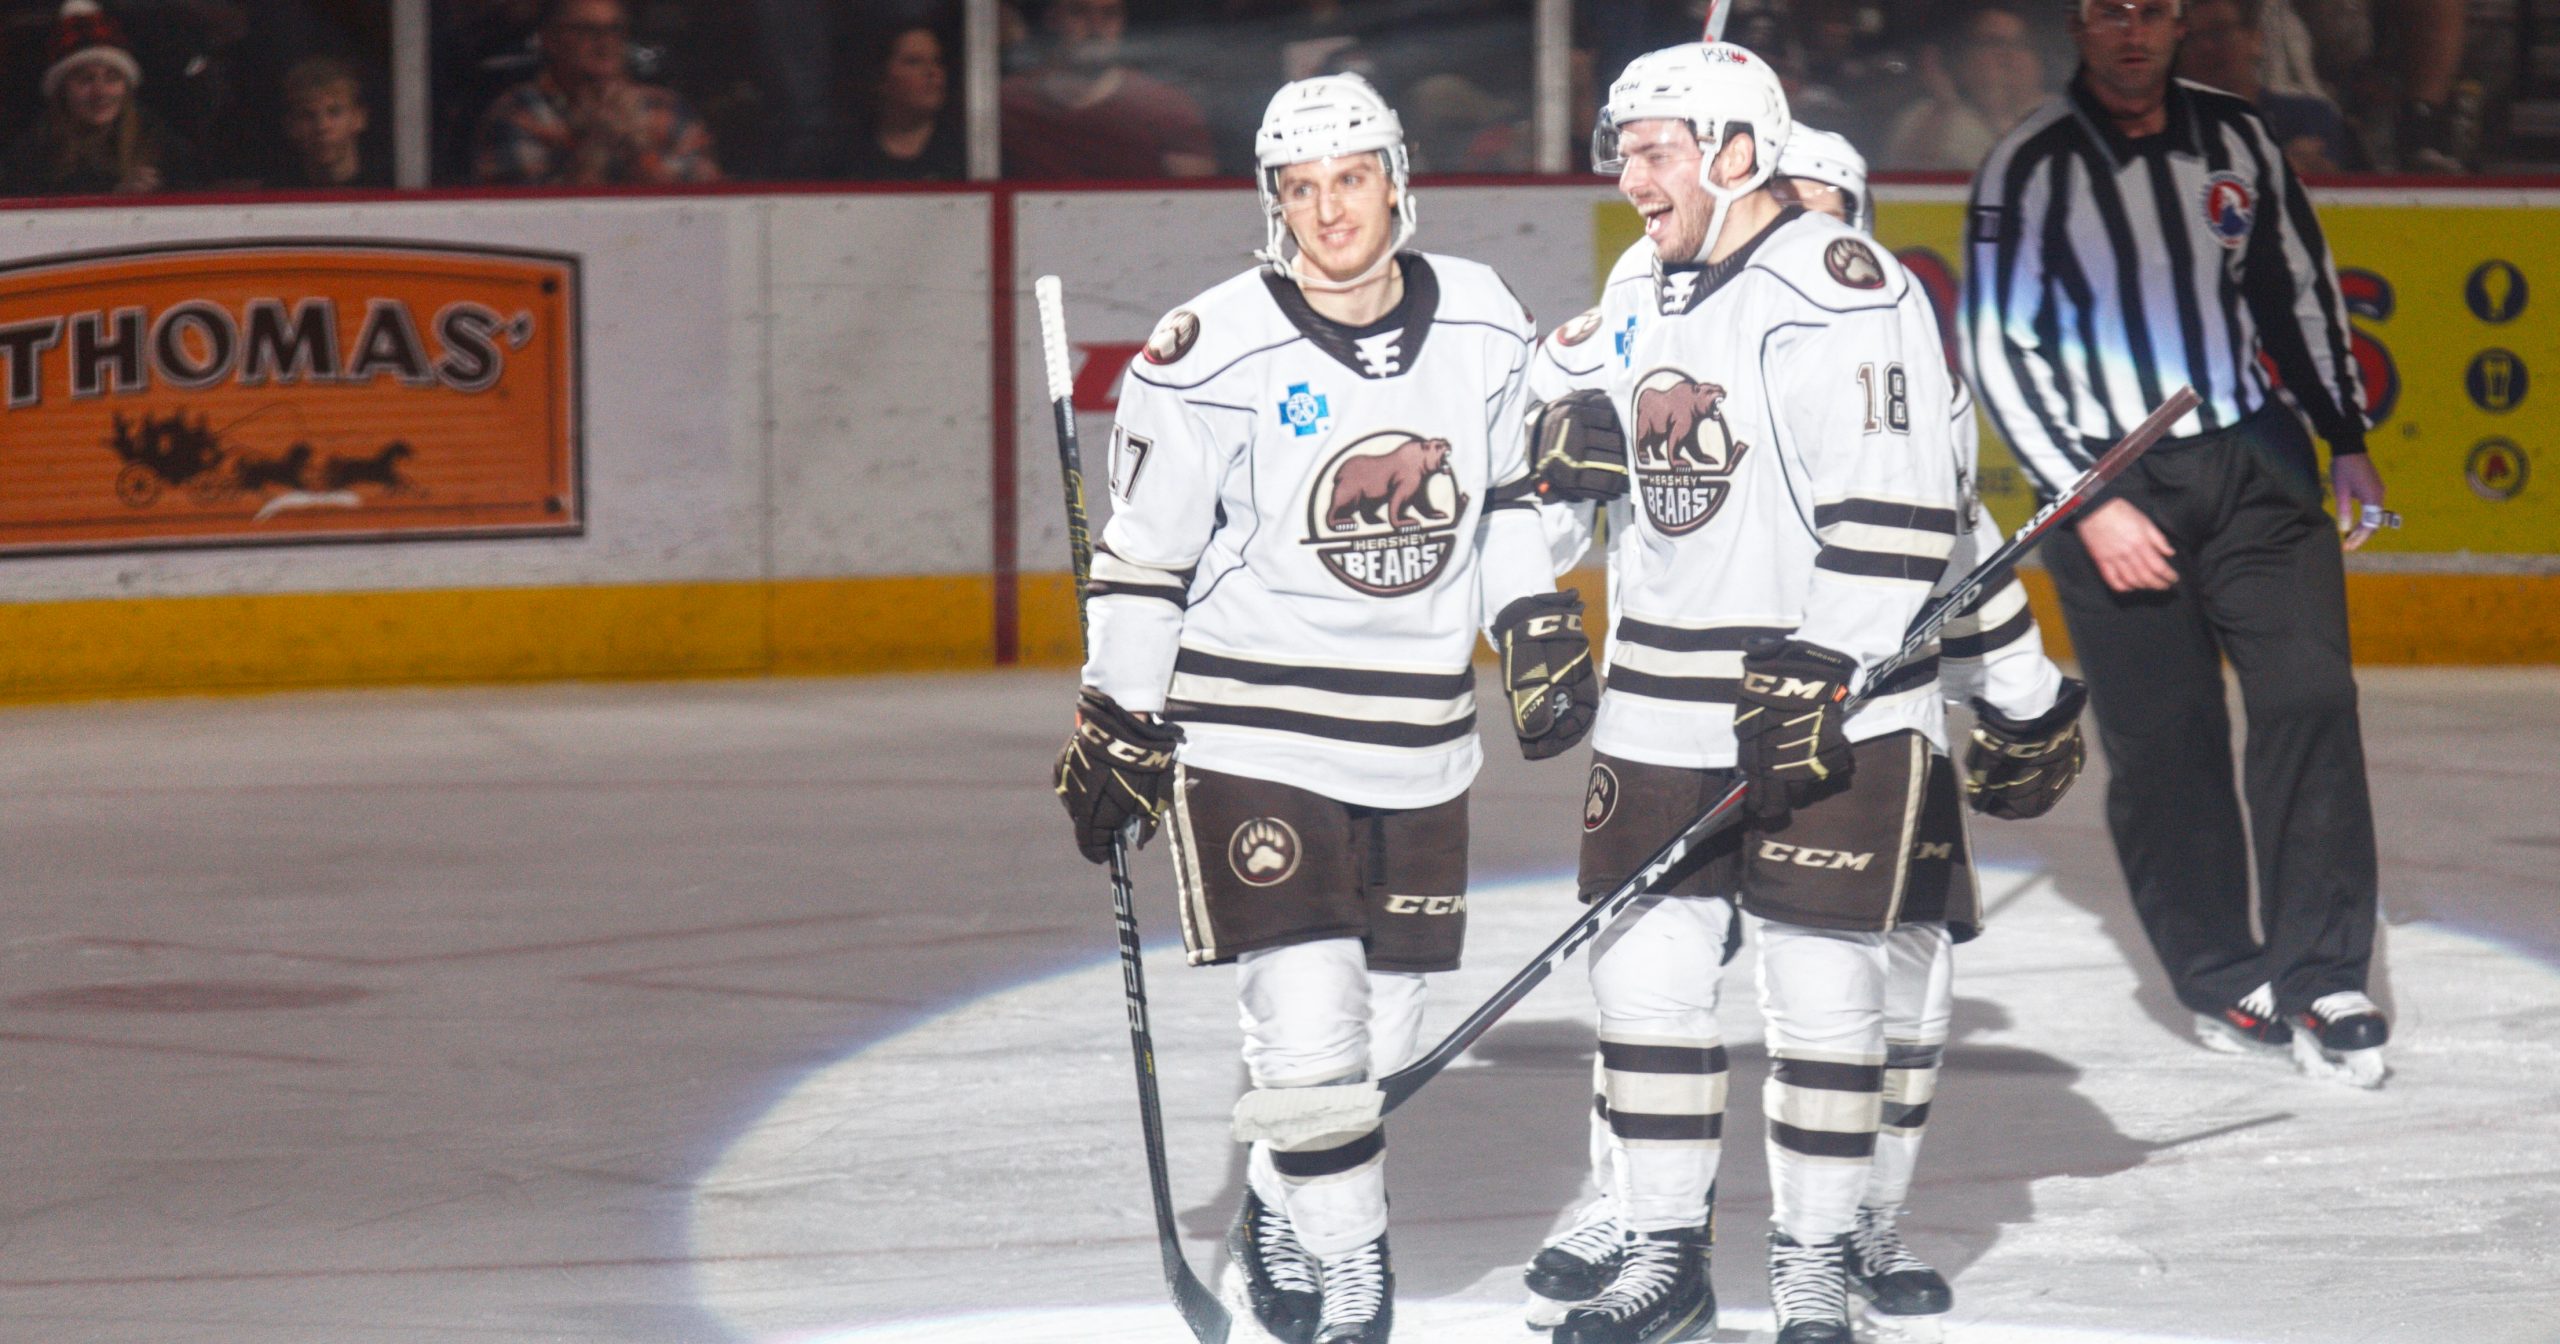 Why the Hershey Bears have a proud AHL tradition - The Washington Post